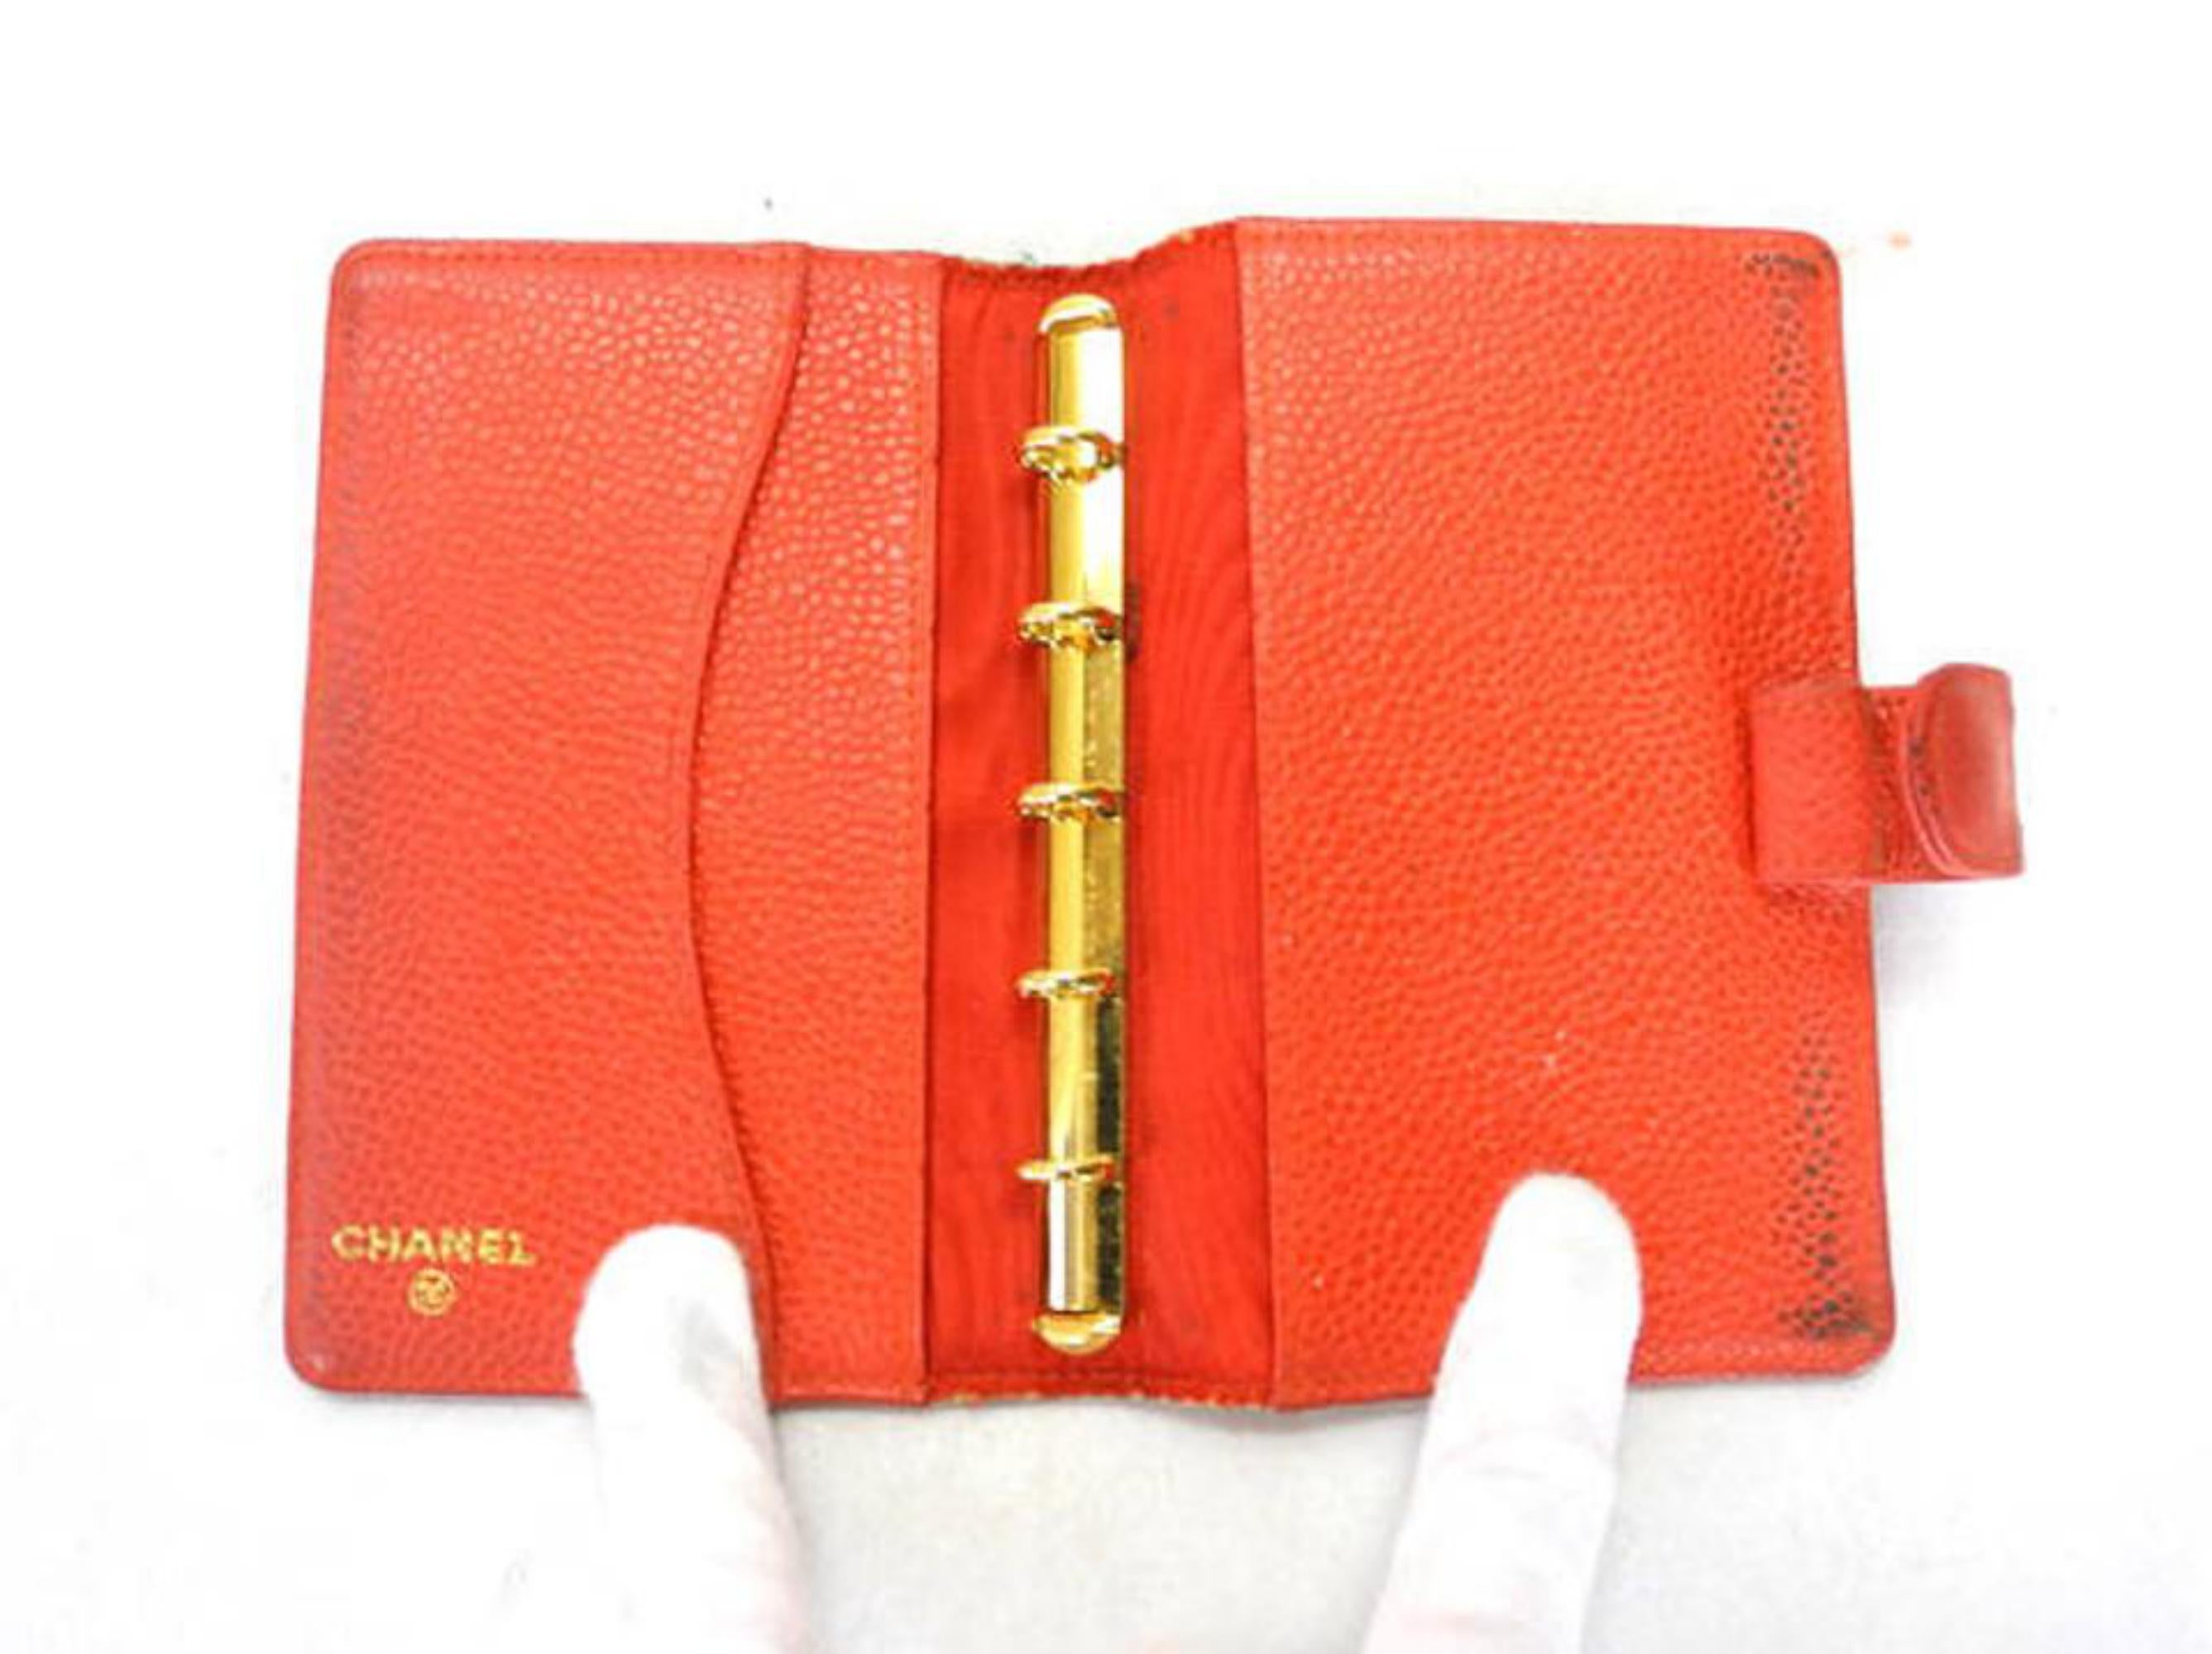 Chanel Red Caviar Agenda Organizer Book 218306 In Good Condition For Sale In Forest Hills, NY